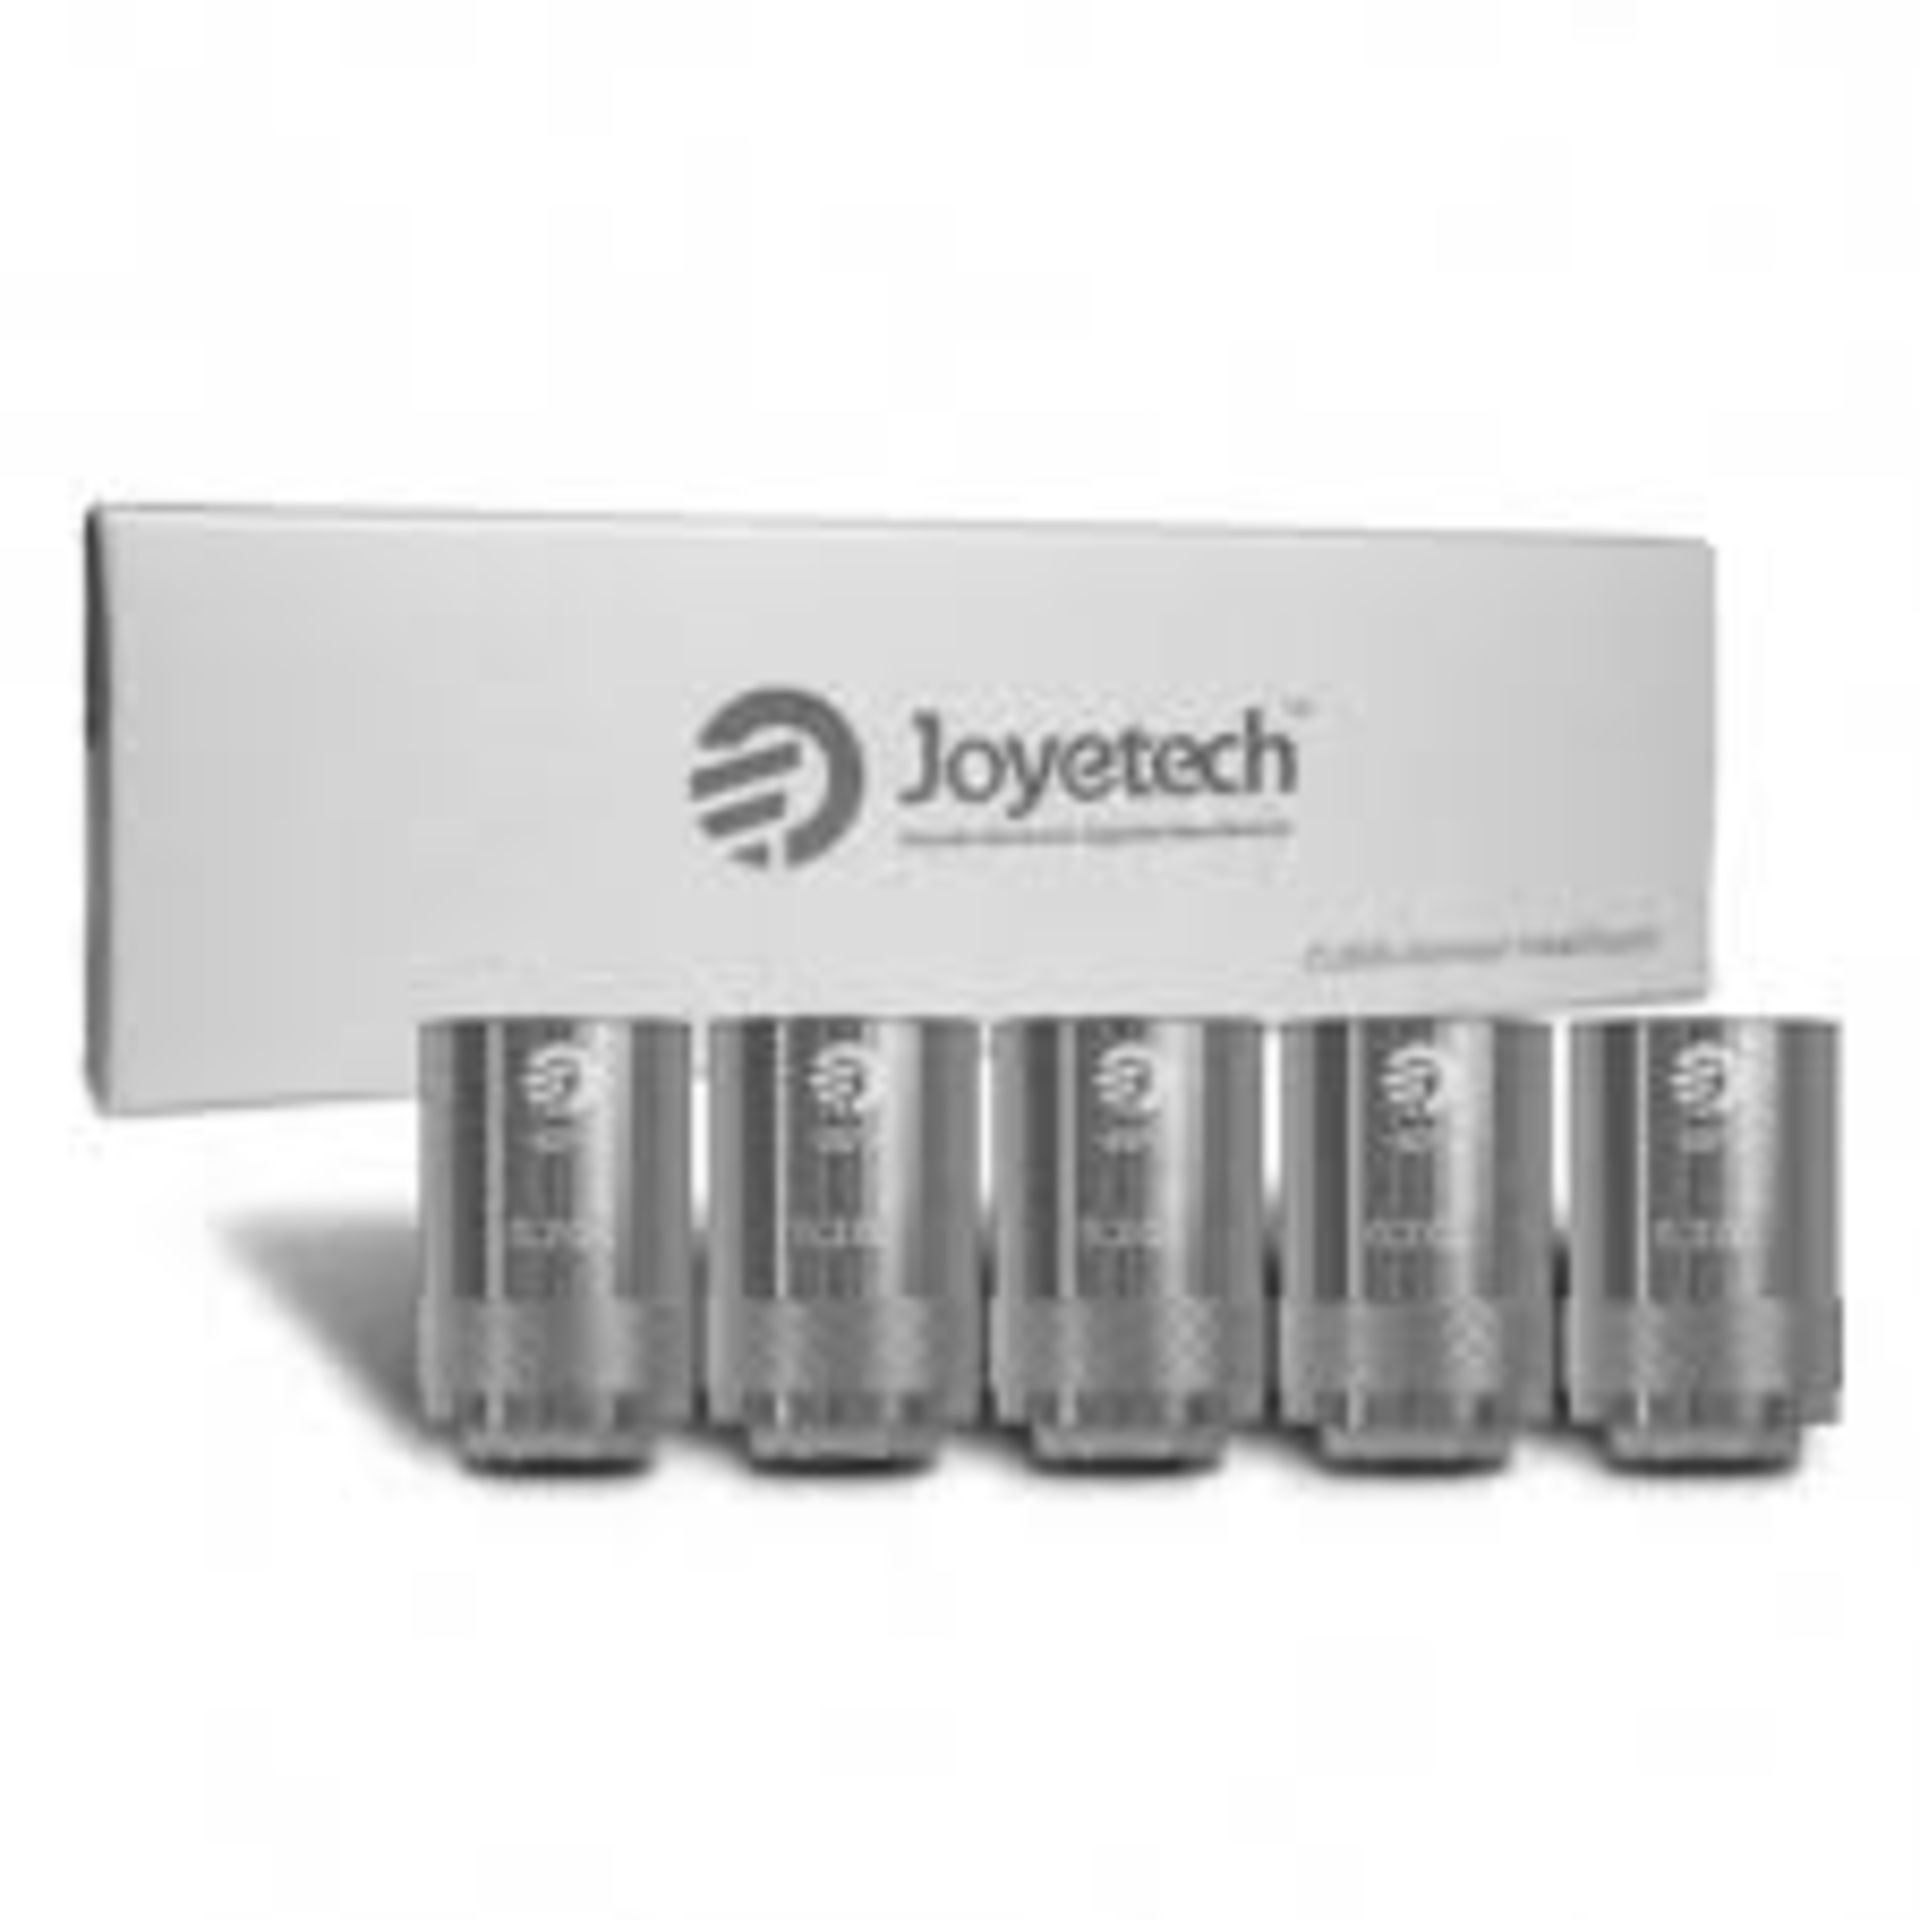 15 X BRAND NEW Joyetech BF Coils PACKS OF 5. The Joyetech BF atomizers are designed for use with top